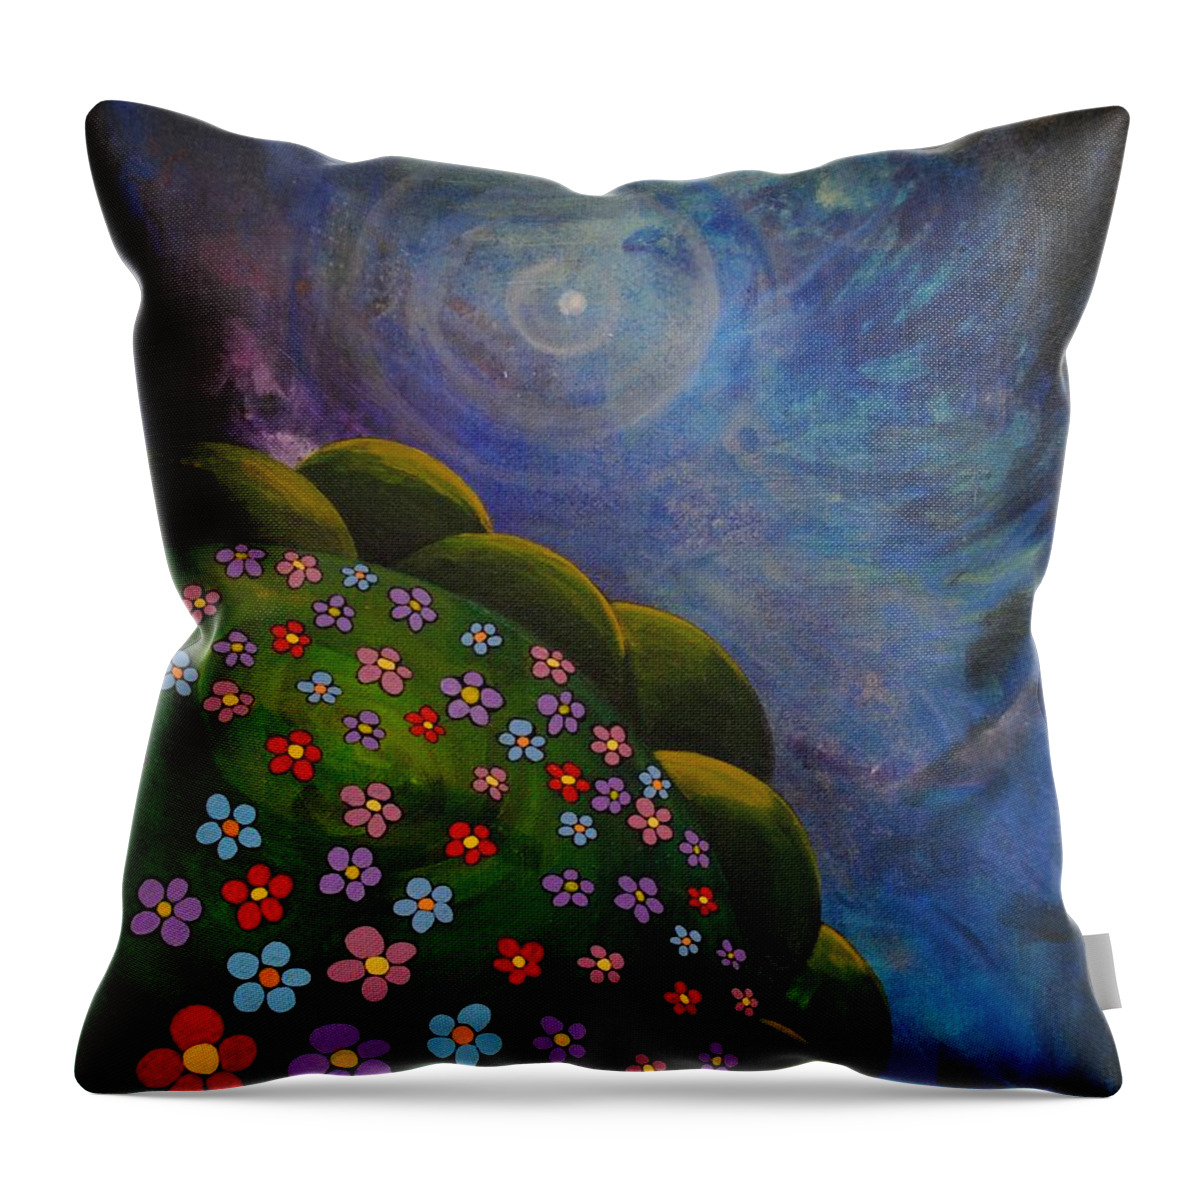 Landscape Throw Pillow featuring the painting Landscape by Mindy Huntress